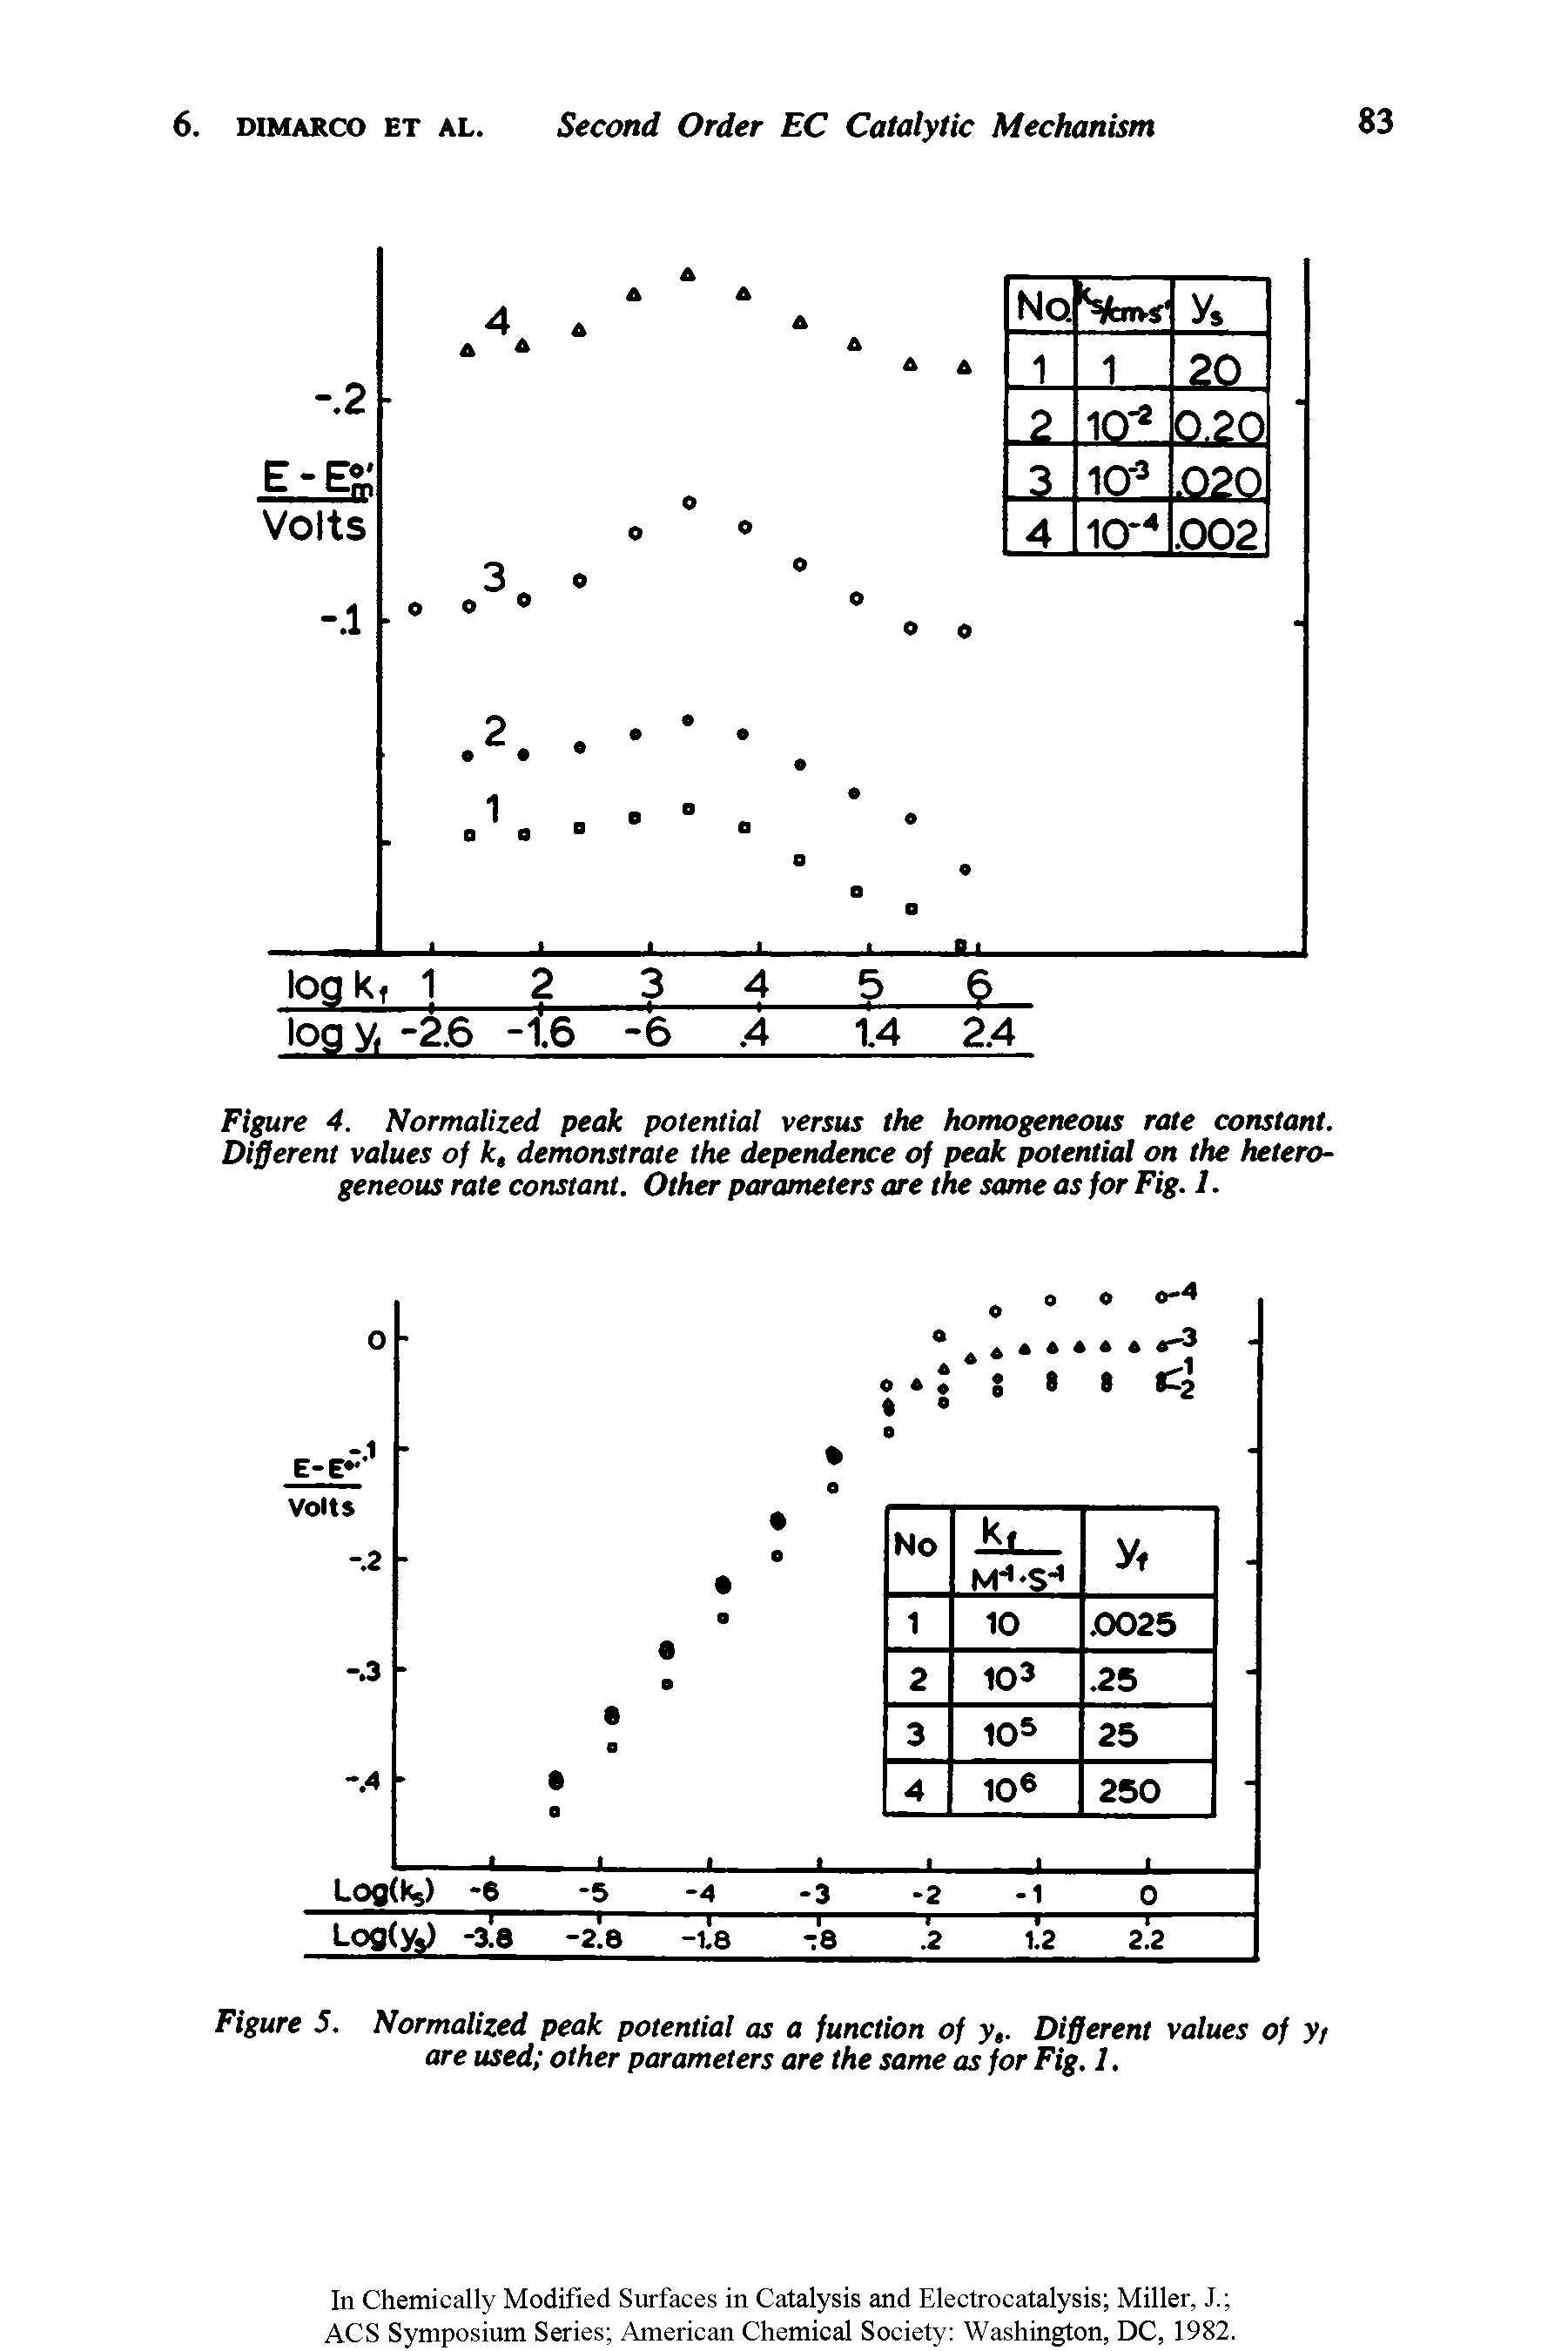 Figure 4. Normalized peak potential versus the homogeneous rate constant. Different values of k, demonstrate the dependence of peak potential on the heterogeneous rate constant. Other parameters are the same as for Fig. 1.